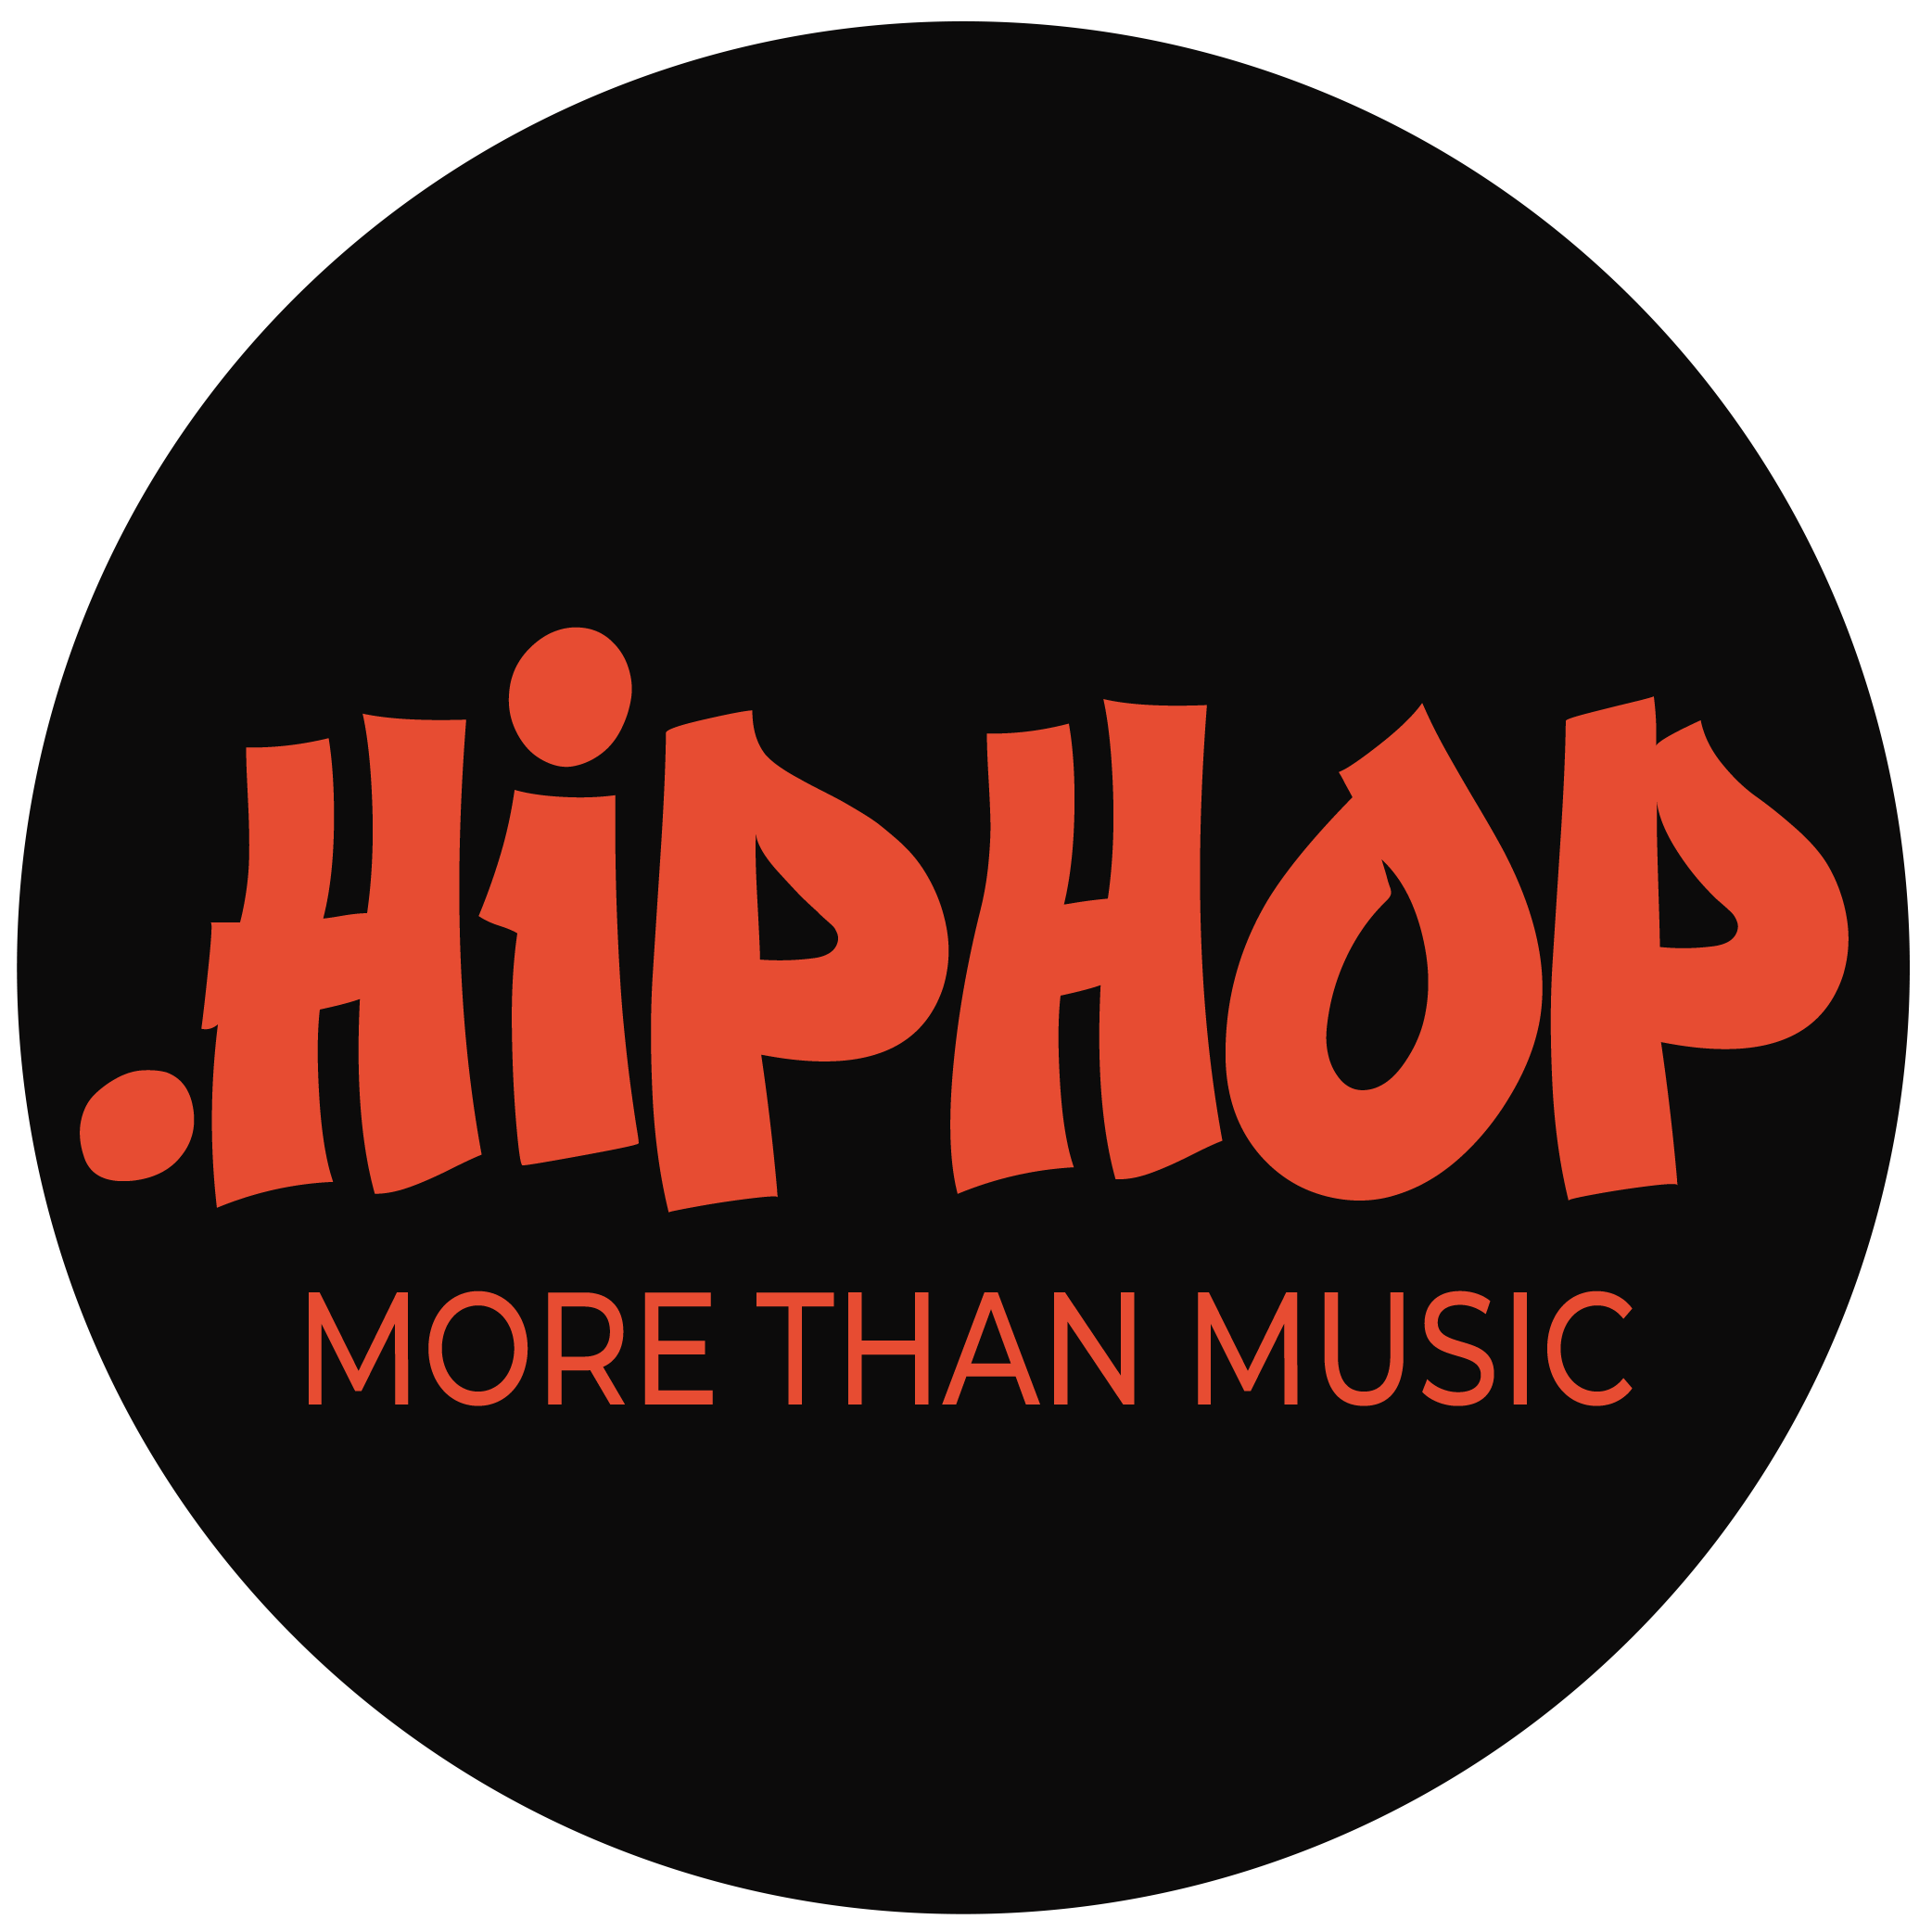 .Hiphop - More than music